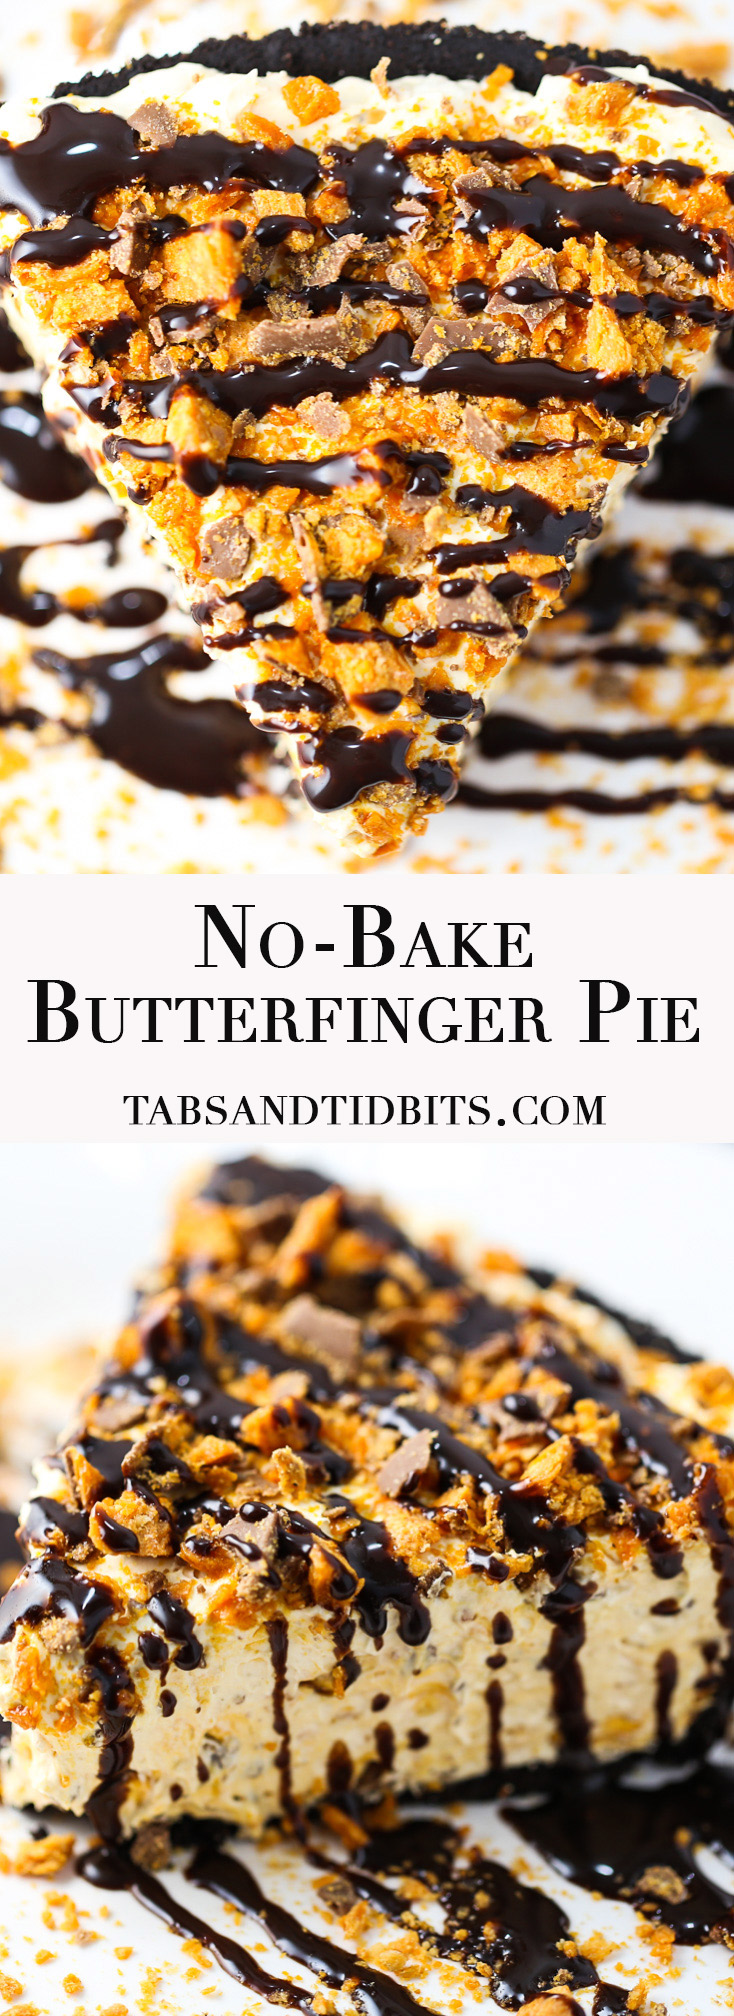 No Bake Butterfinger Pie - A creamy pie filled with crushed Butterfingers and topped with more Butterfingers and chocolate sauce!